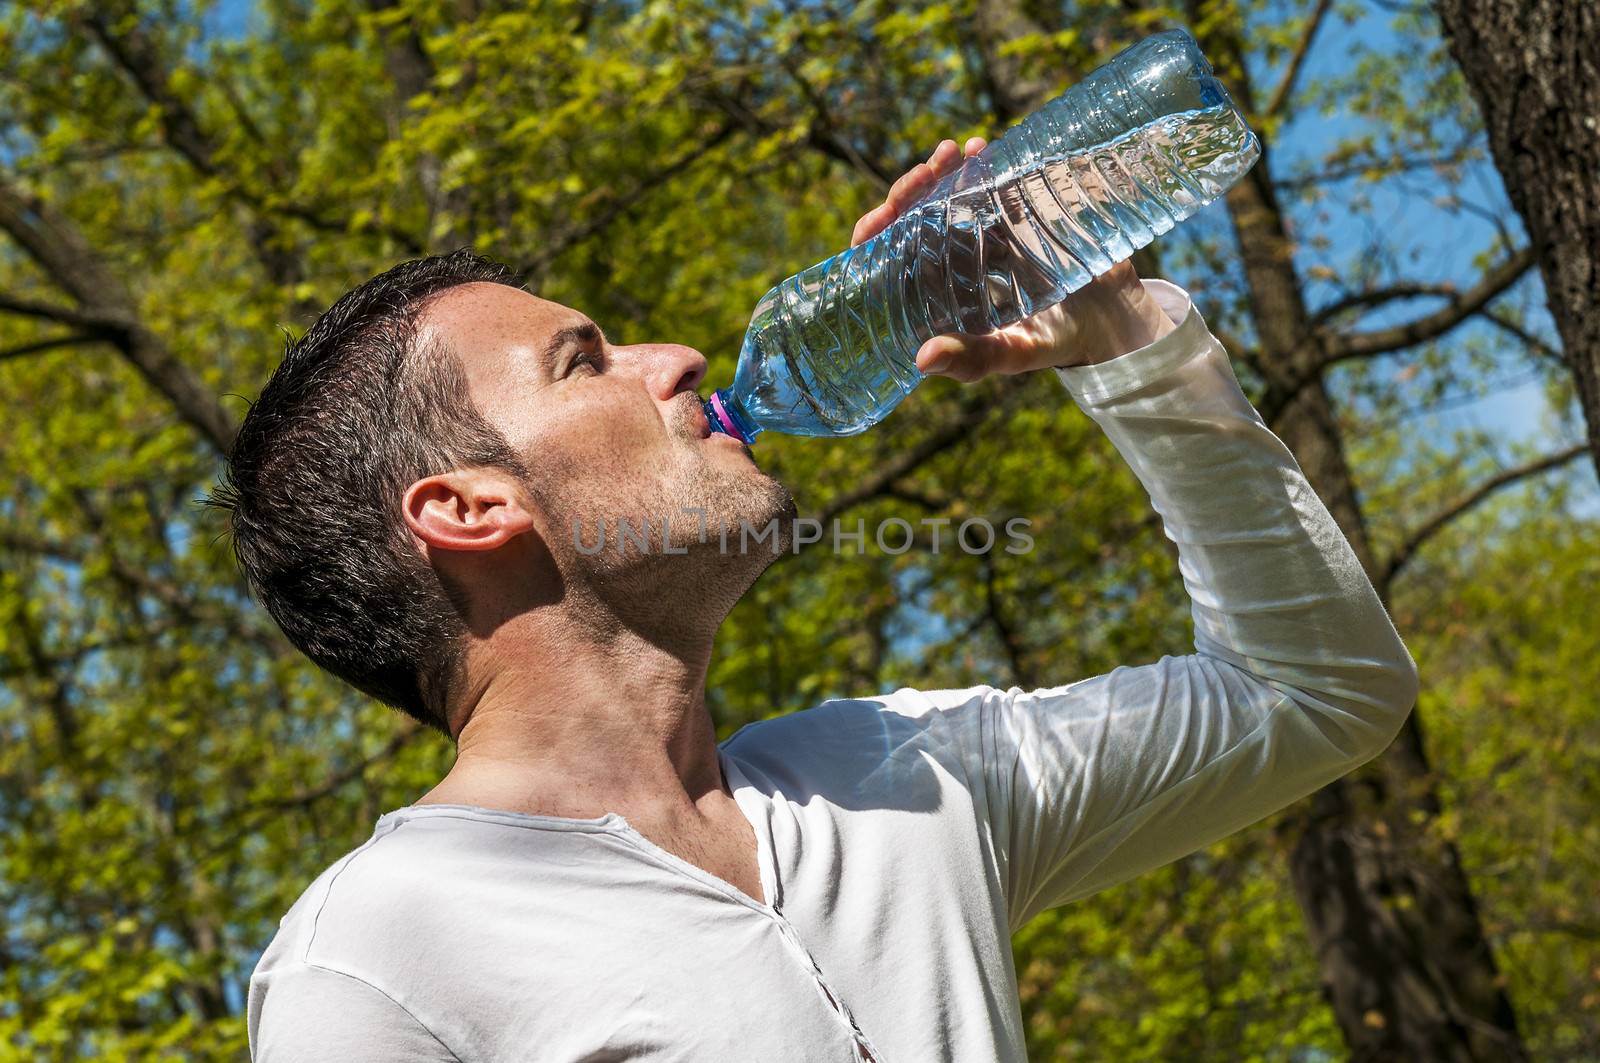 Man is drinking water against a natural background